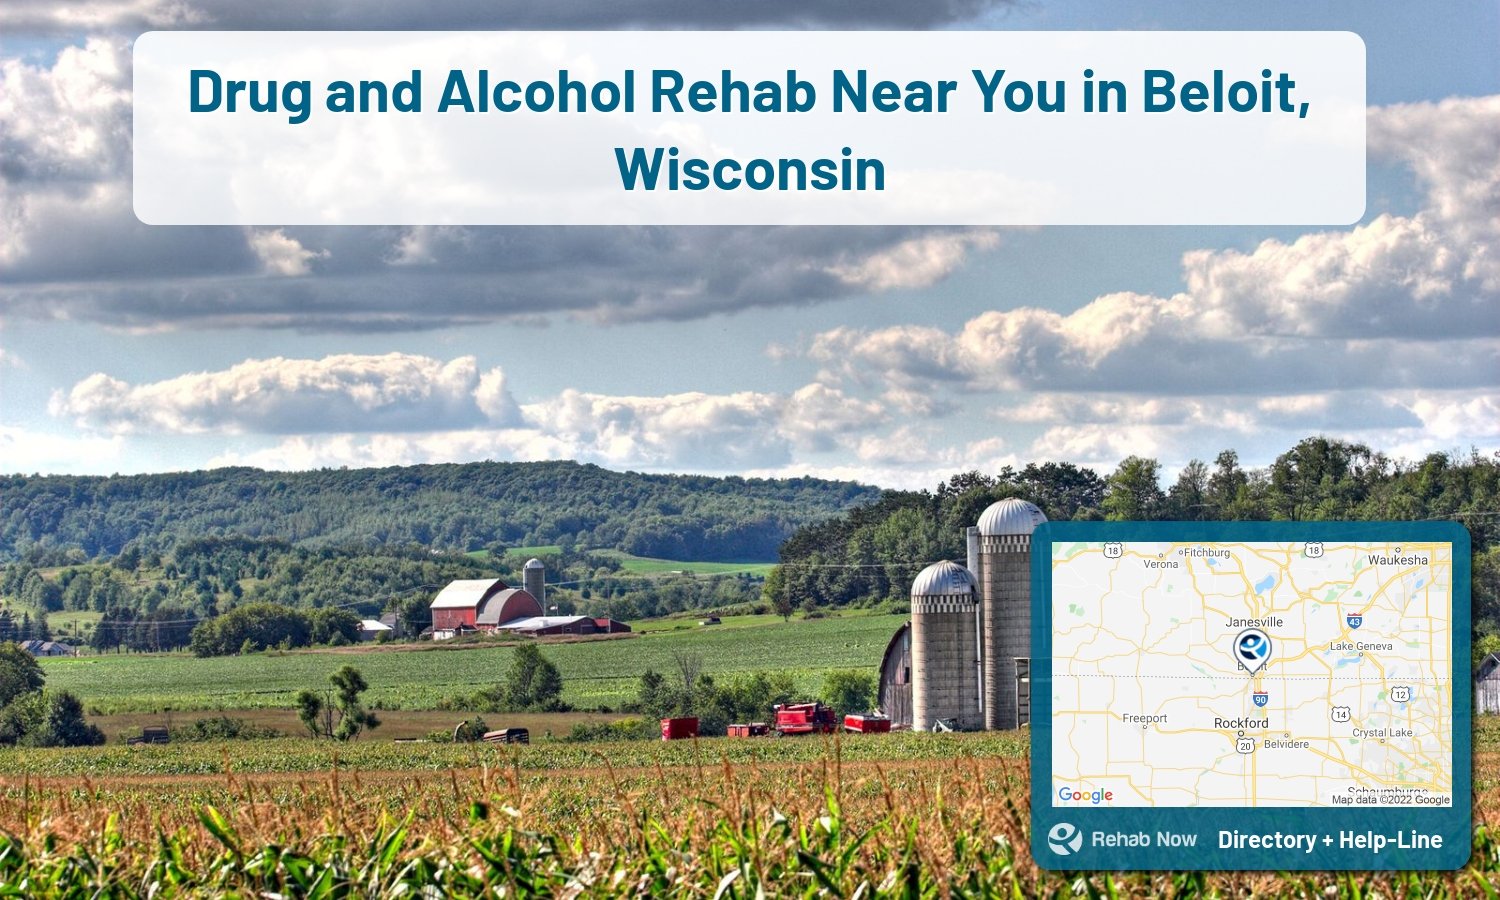 View options, availability, treatment methods, and more, for drug rehab and alcohol treatment in Beloit, Wisconsin